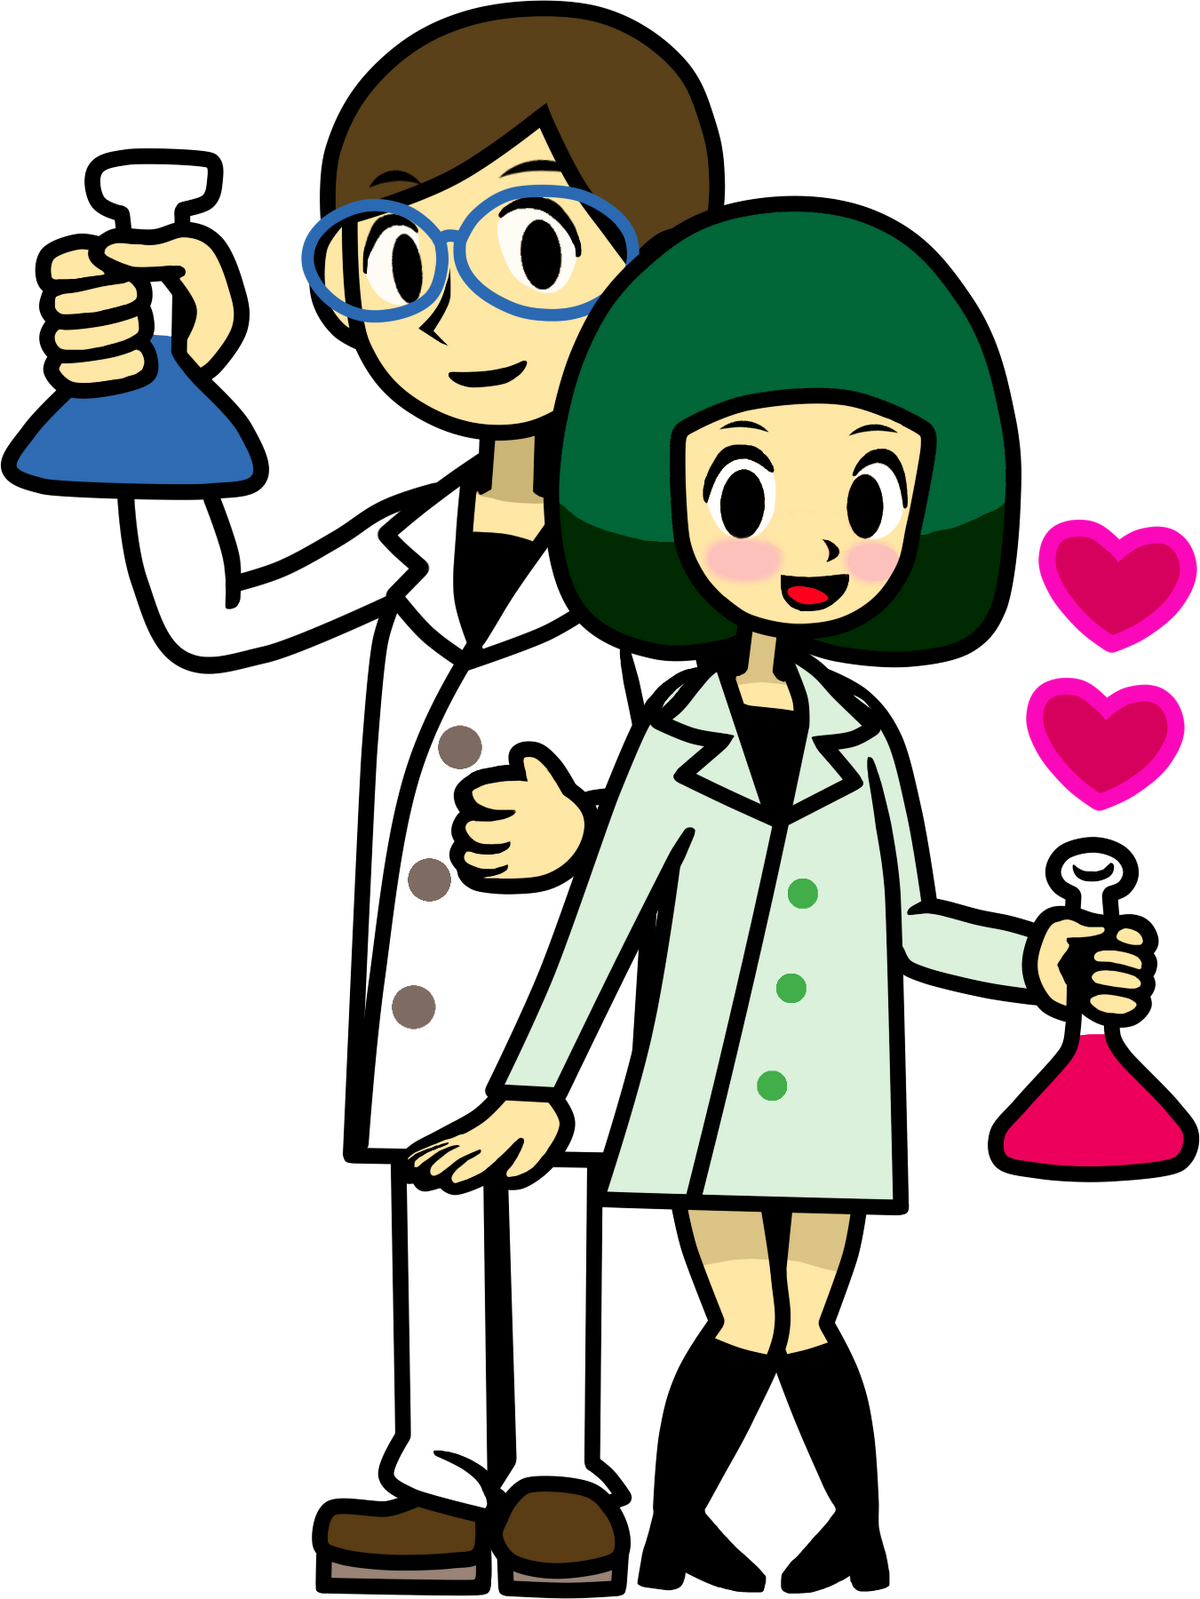 Love Tester Reaction 2 Keroro and Nurse Dot by